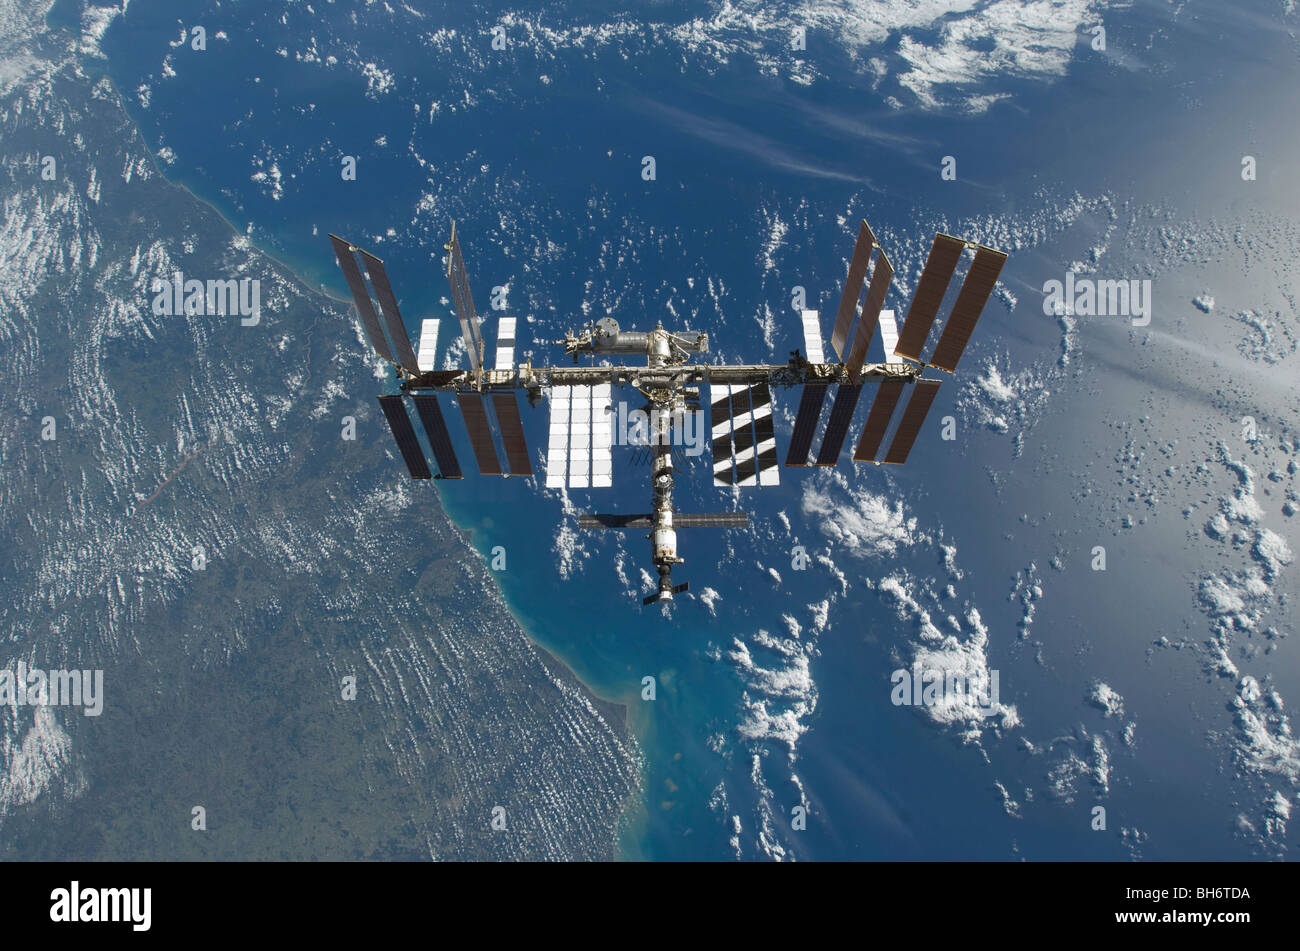 November 25, 2009 - The International Space Station in orbit above the Earth. Stock Photo